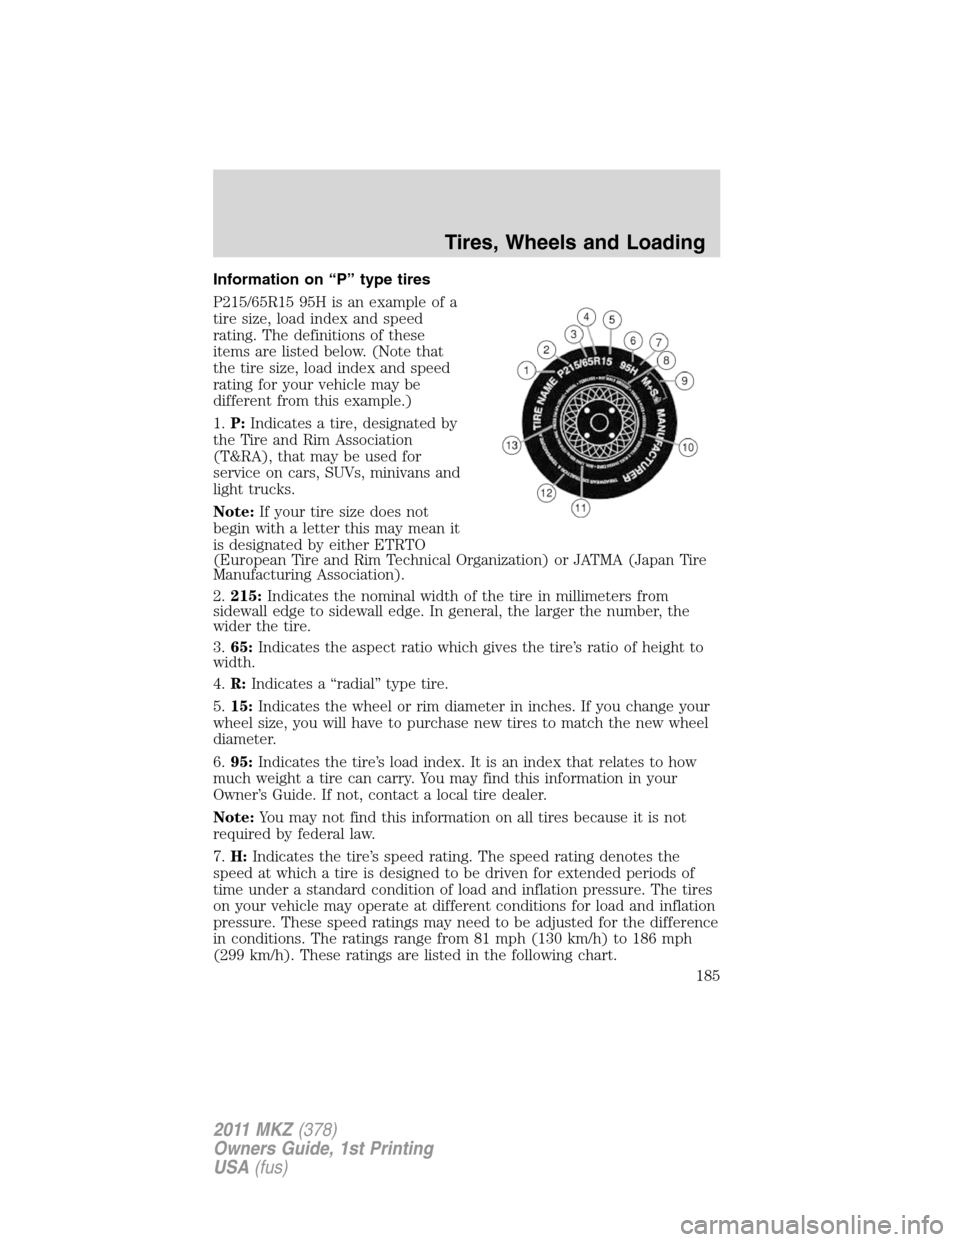 LINCOLN MKZ 2011  Owners Manual Information on “P” type tires
P215/65R15 95H is an example of a
tire size, load index and speed
rating. The definitions of these
items are listed below. (Note that
the tire size, load index and sp